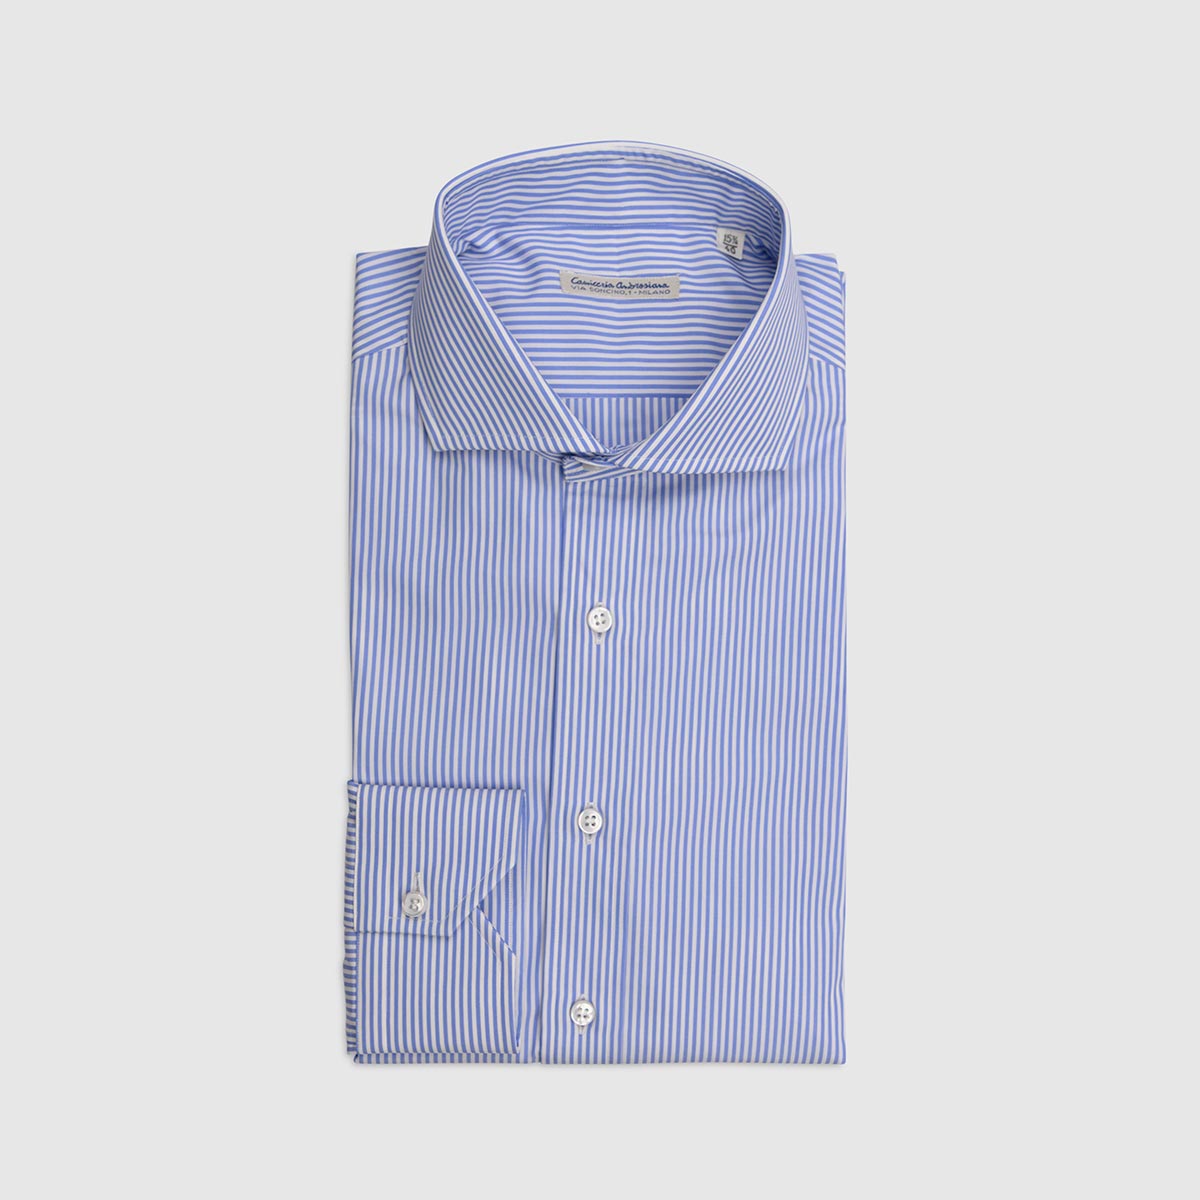 100% Double Twisted Popeline Cotton Shirt – Light Blue and White Stripes Camiceria Ambrosiana on sale 2022